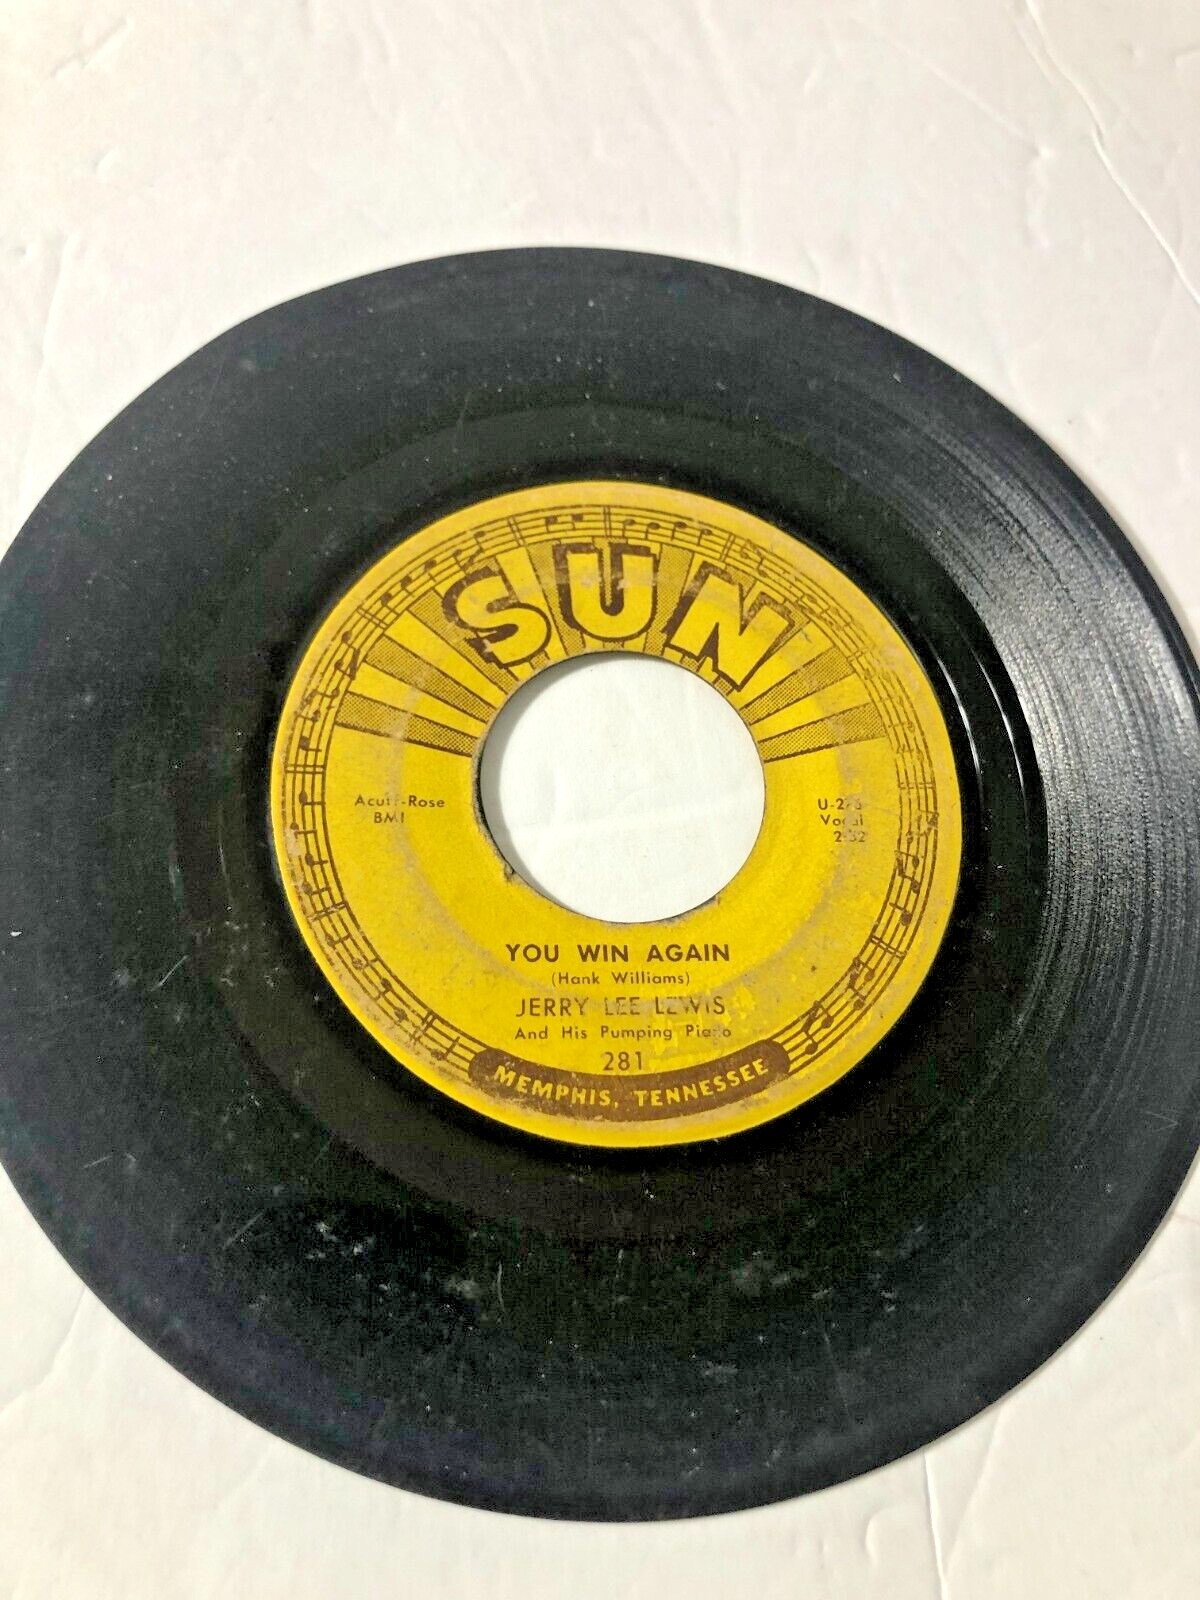 Jerry Lee Lewis on SUN Records No 281, Great Balls of Fire, Good condition.